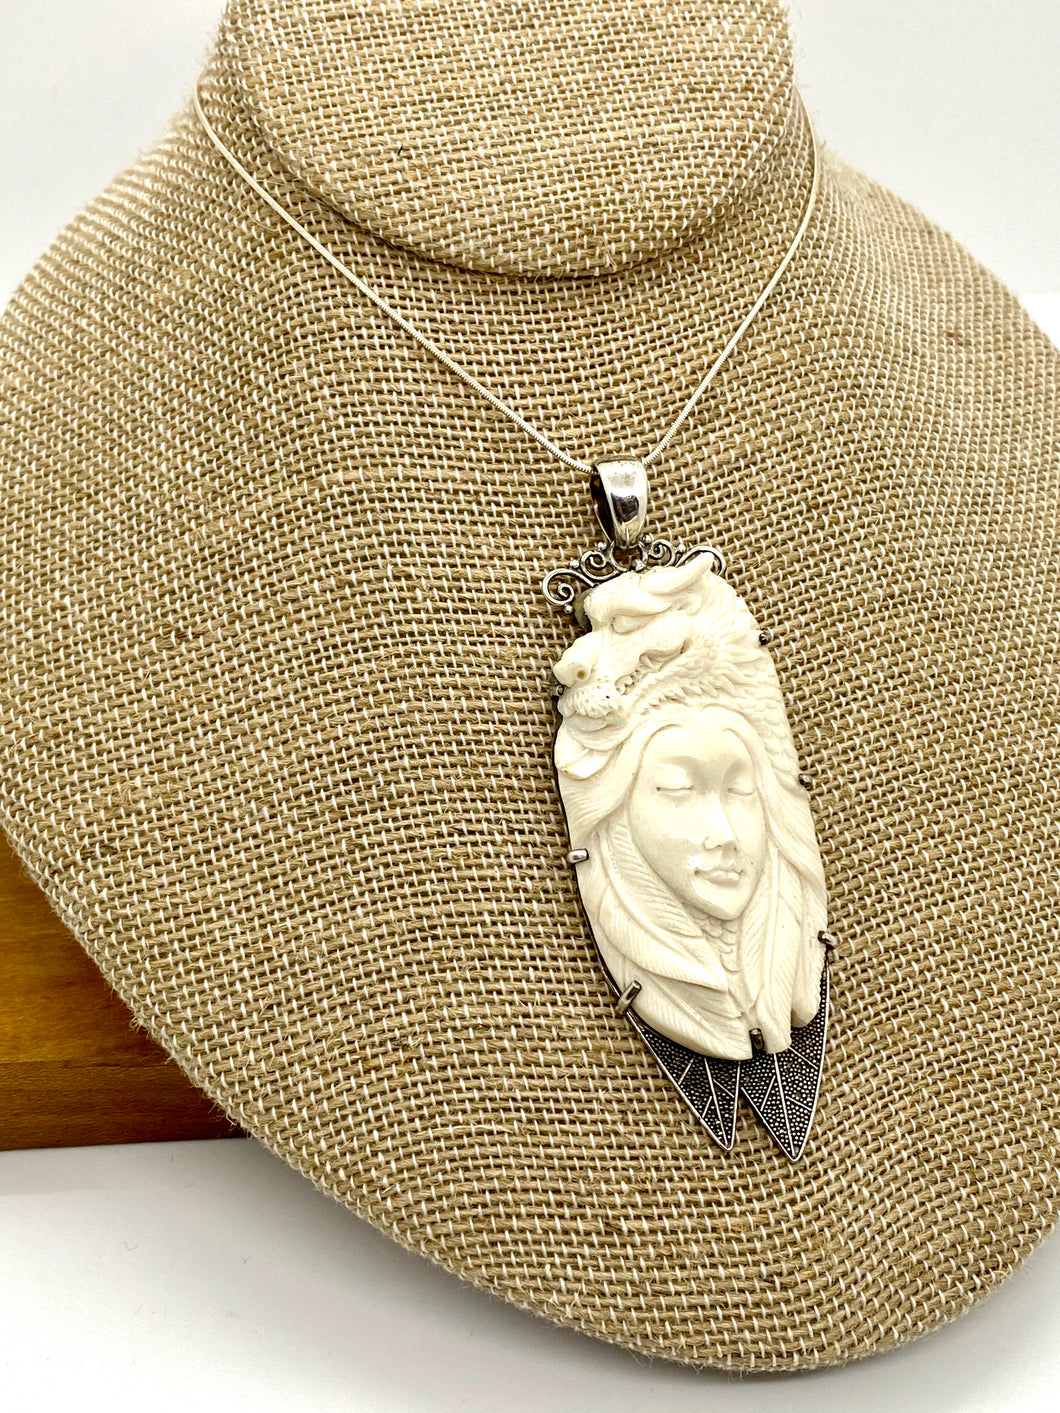 Carved Woman and Dragon Sterling Silver Pendant